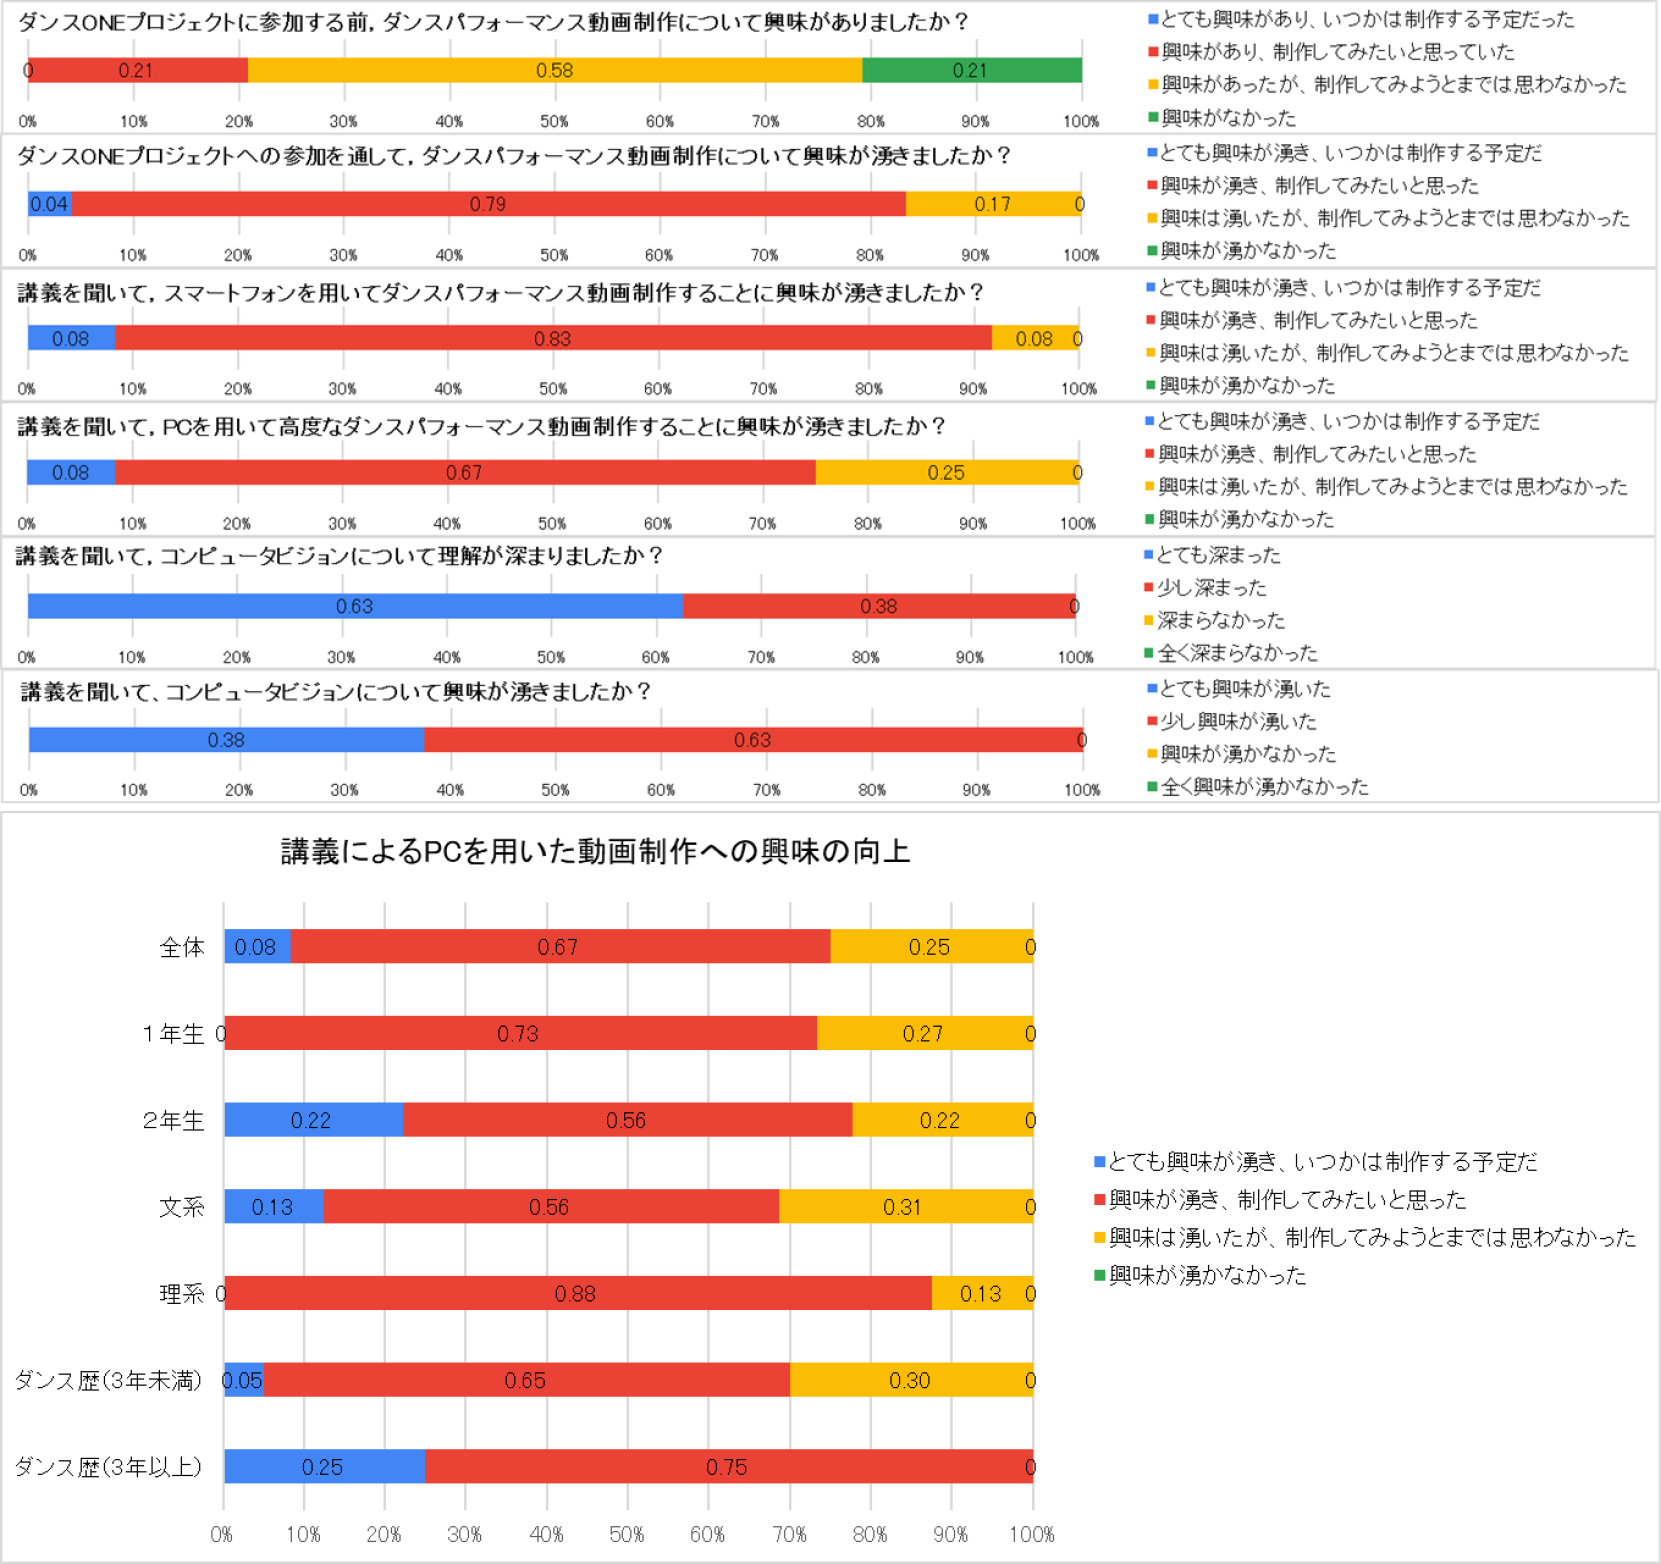 ITの活用体験の向上に関する意向調査　Results of an intention survey on improvement of IT utilization experience.